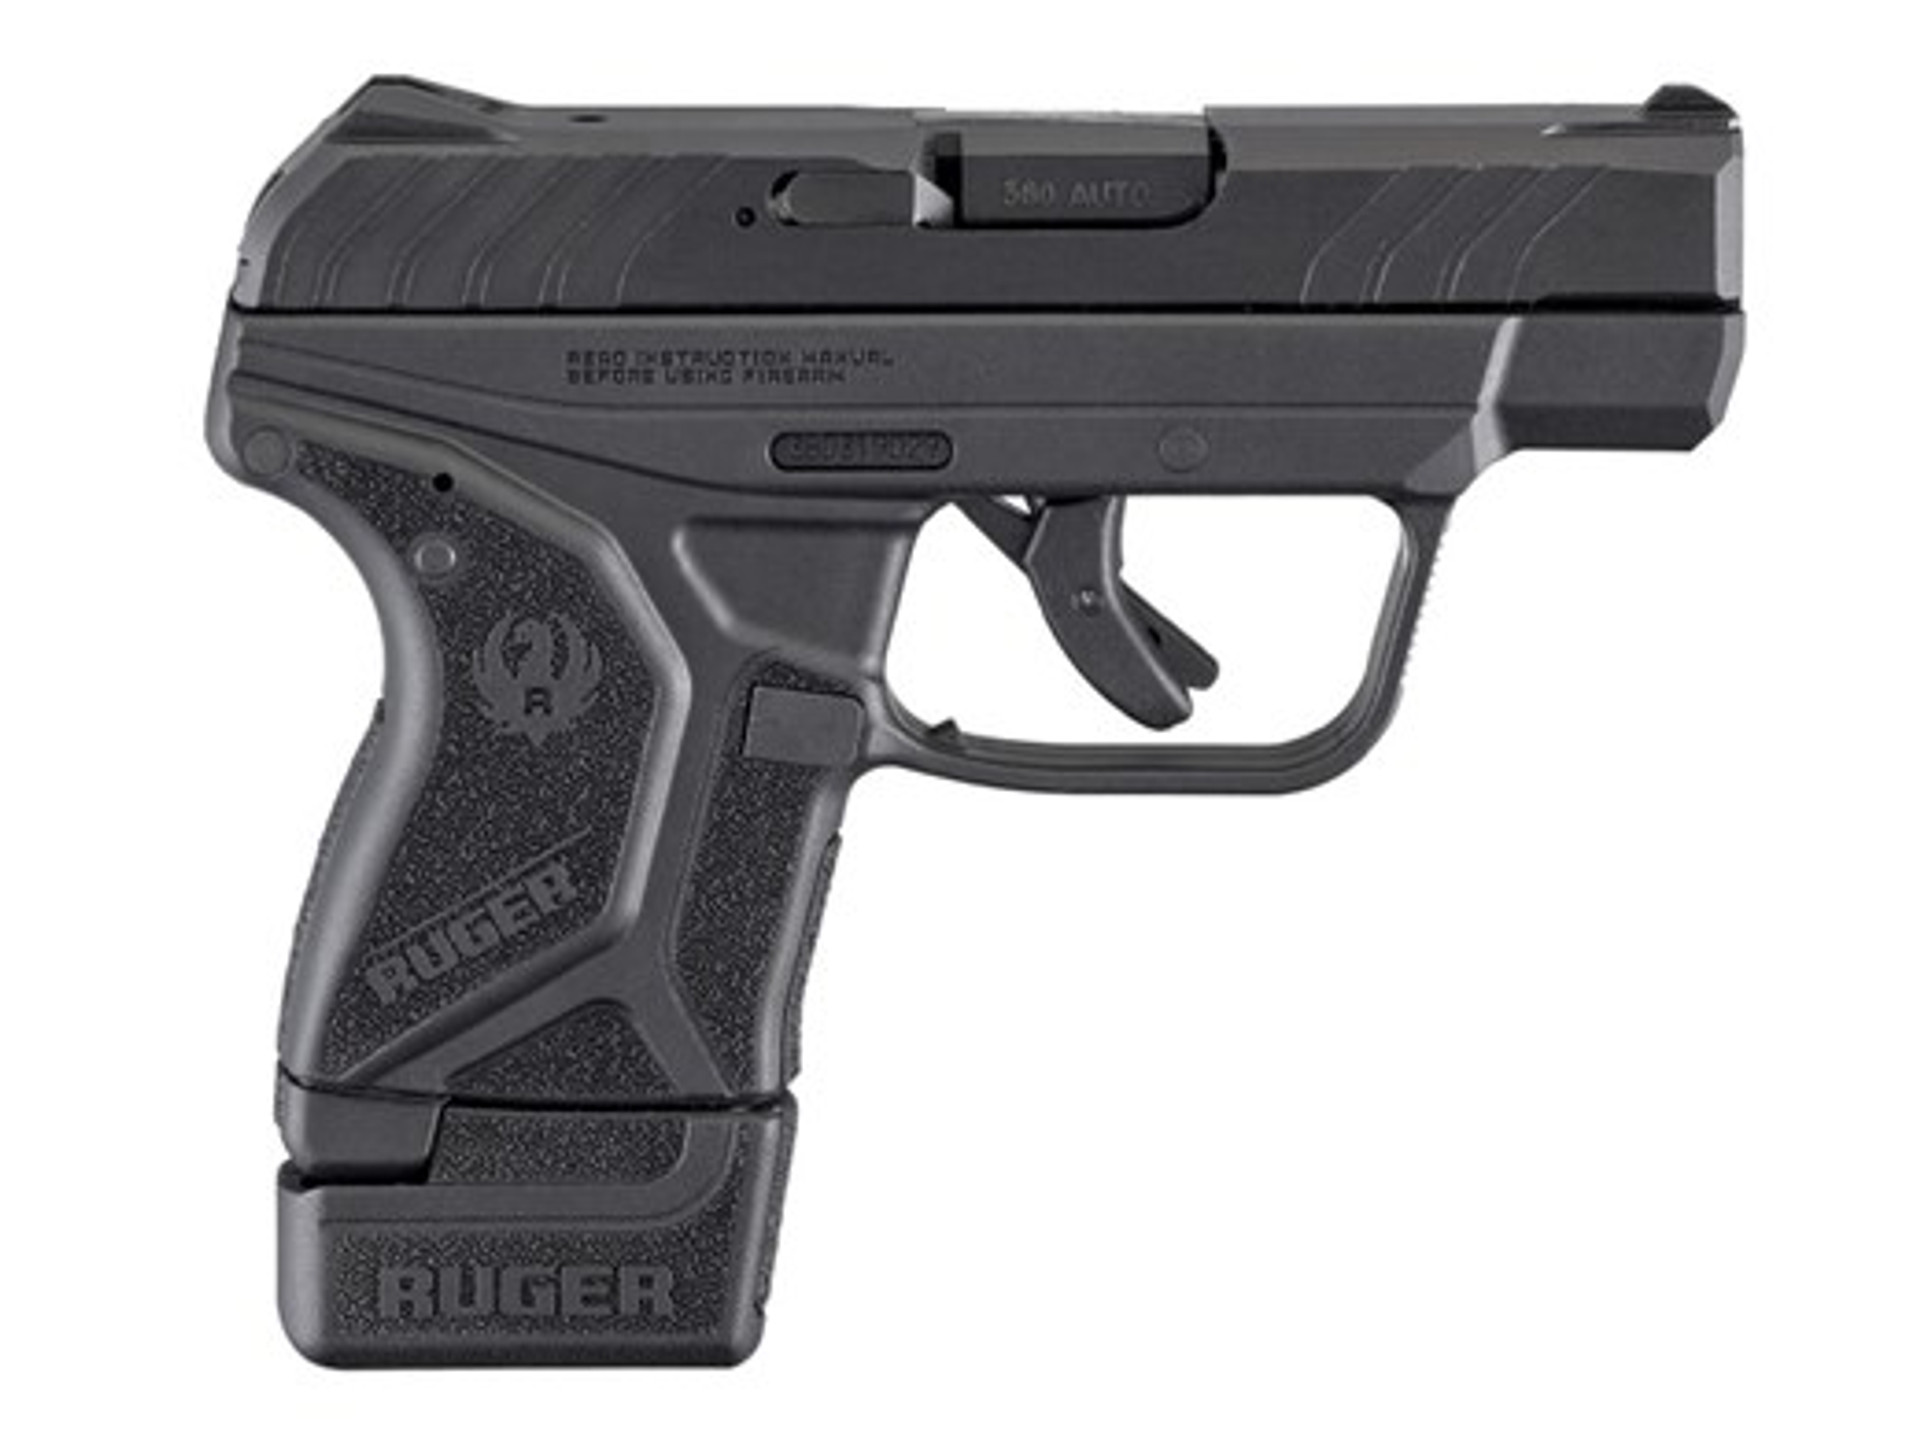 Ruger Lcp Ii380 Acp Fde 0213